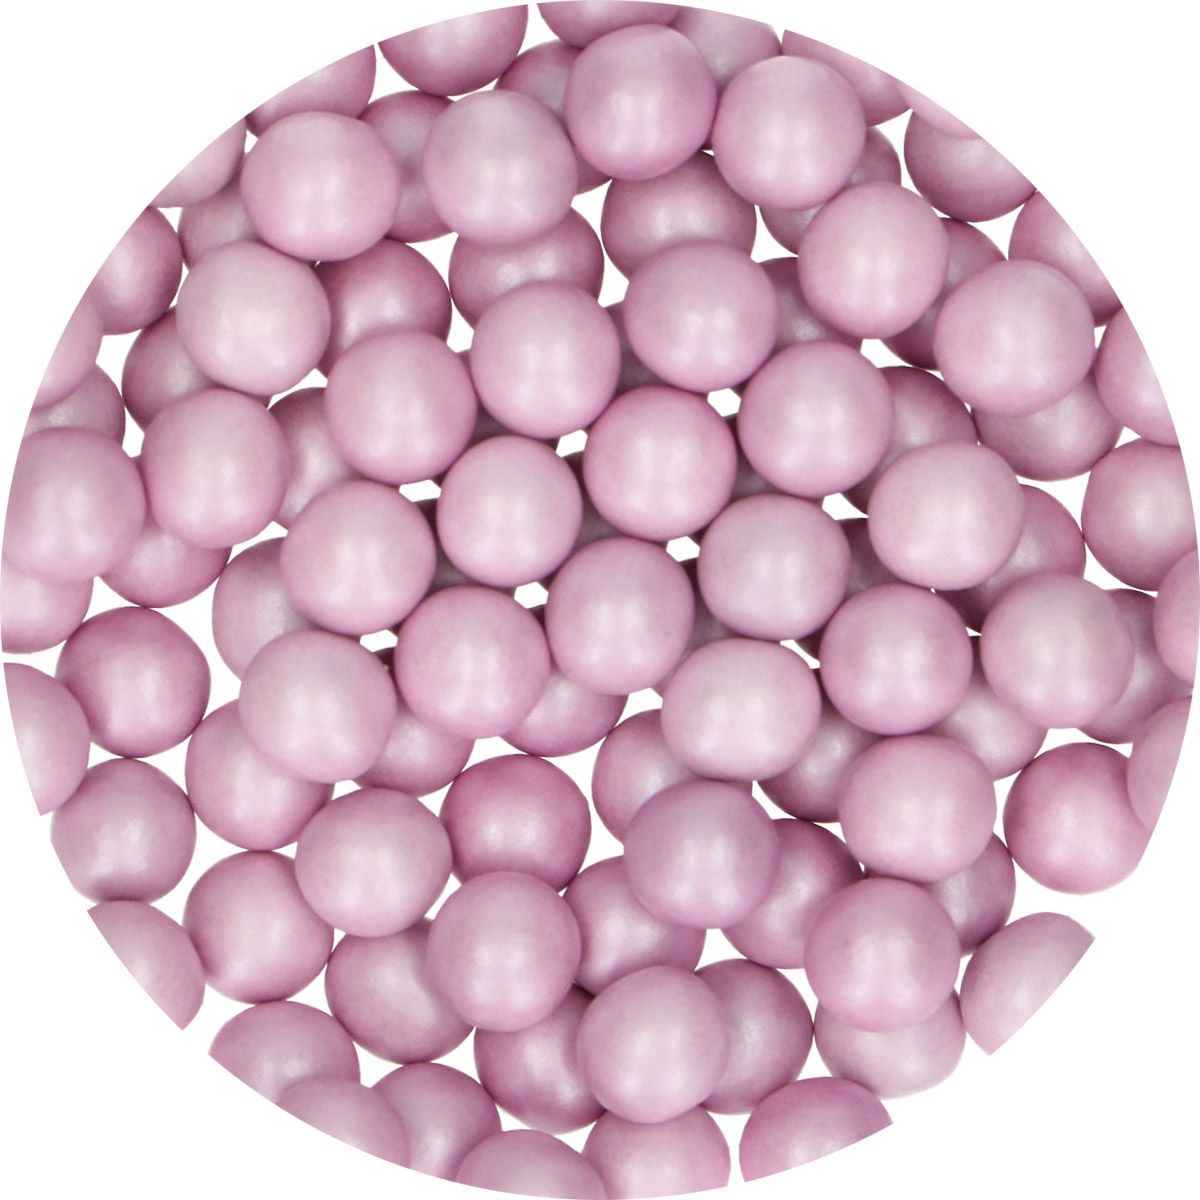 FUNCAKES CANDY CHOCO PEARLS LARGE LILAC 70 G